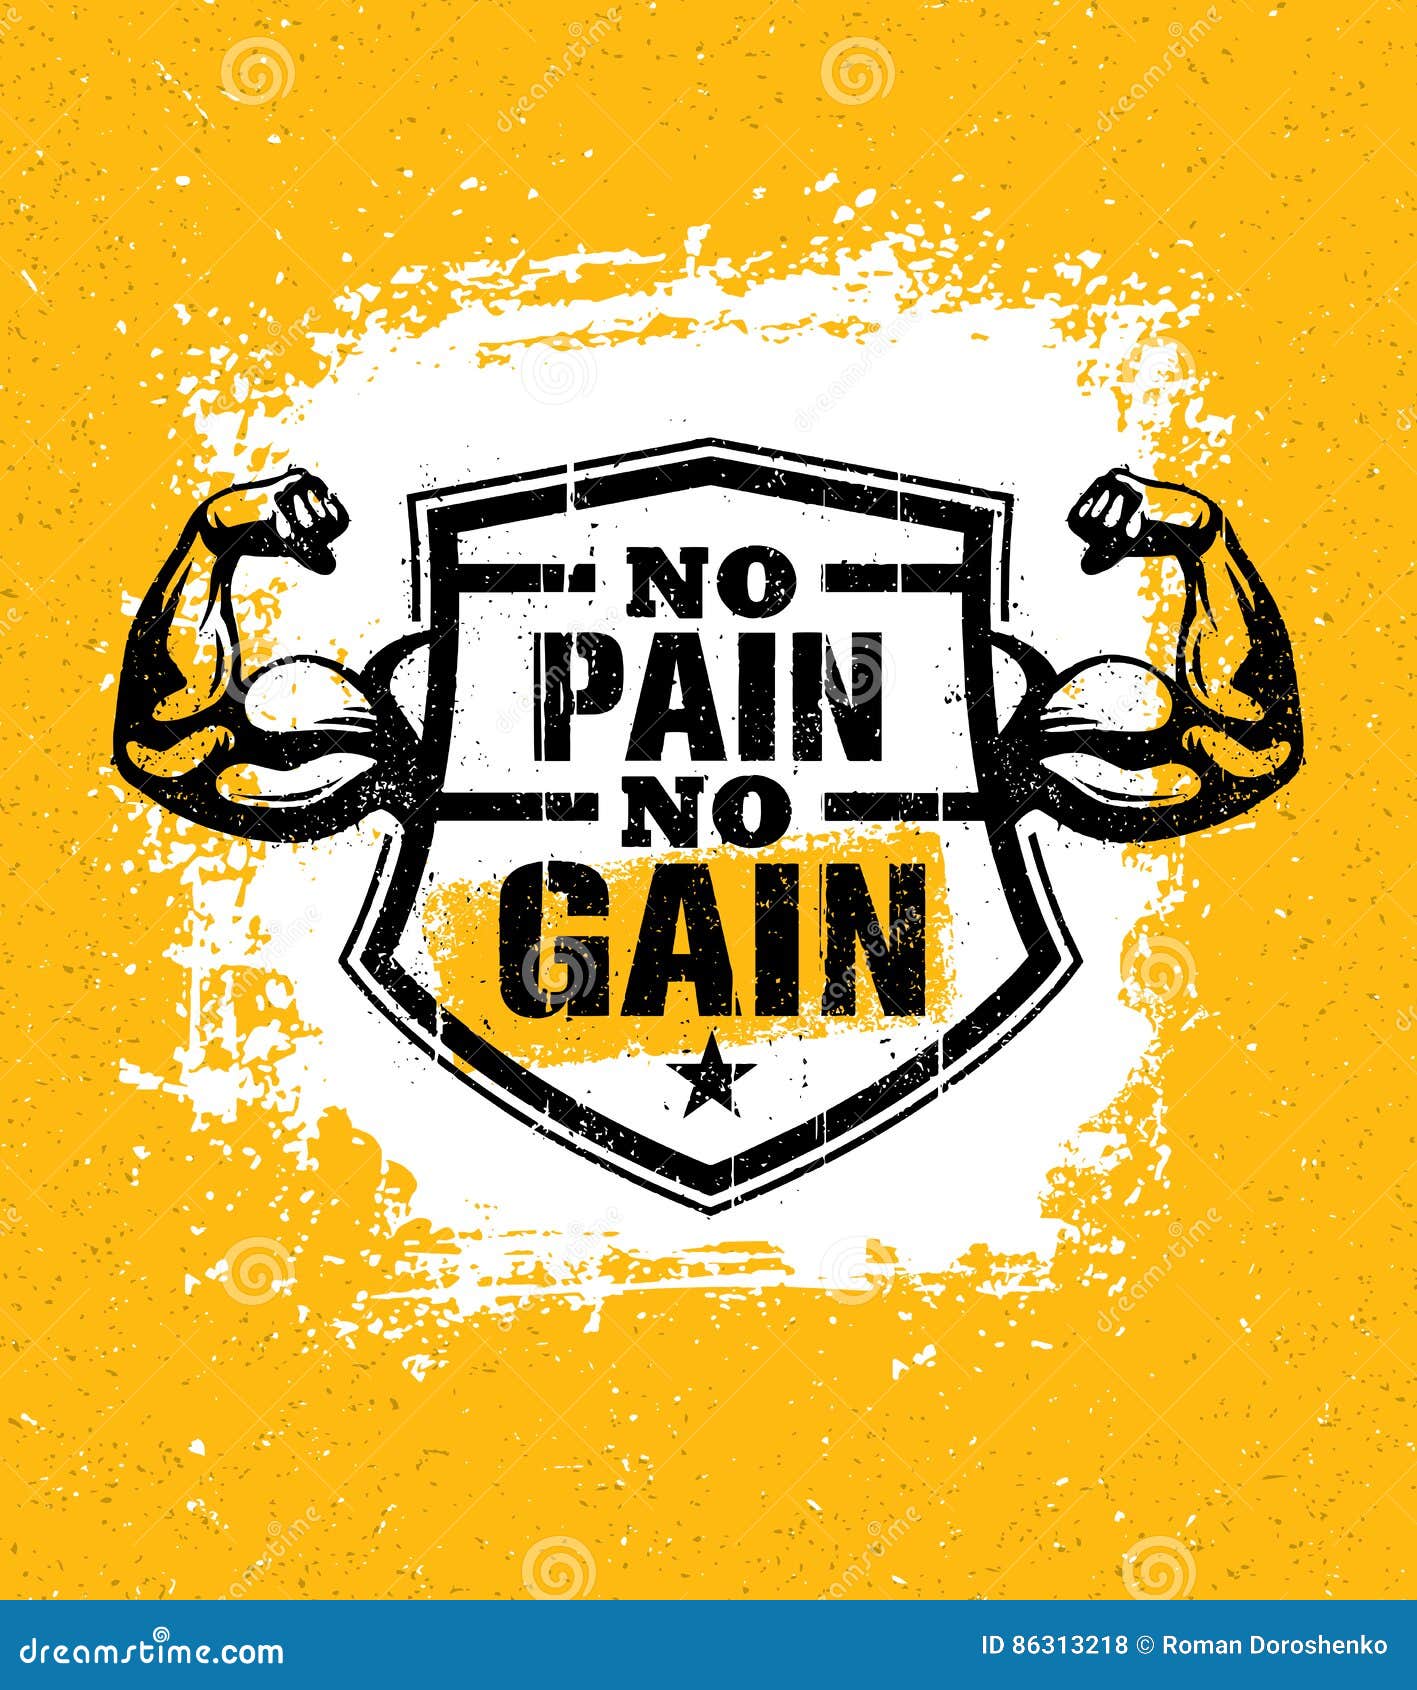 no pain no gain. gym workout motivation quote  concept. sport fitness inspiration sign. muscle arm